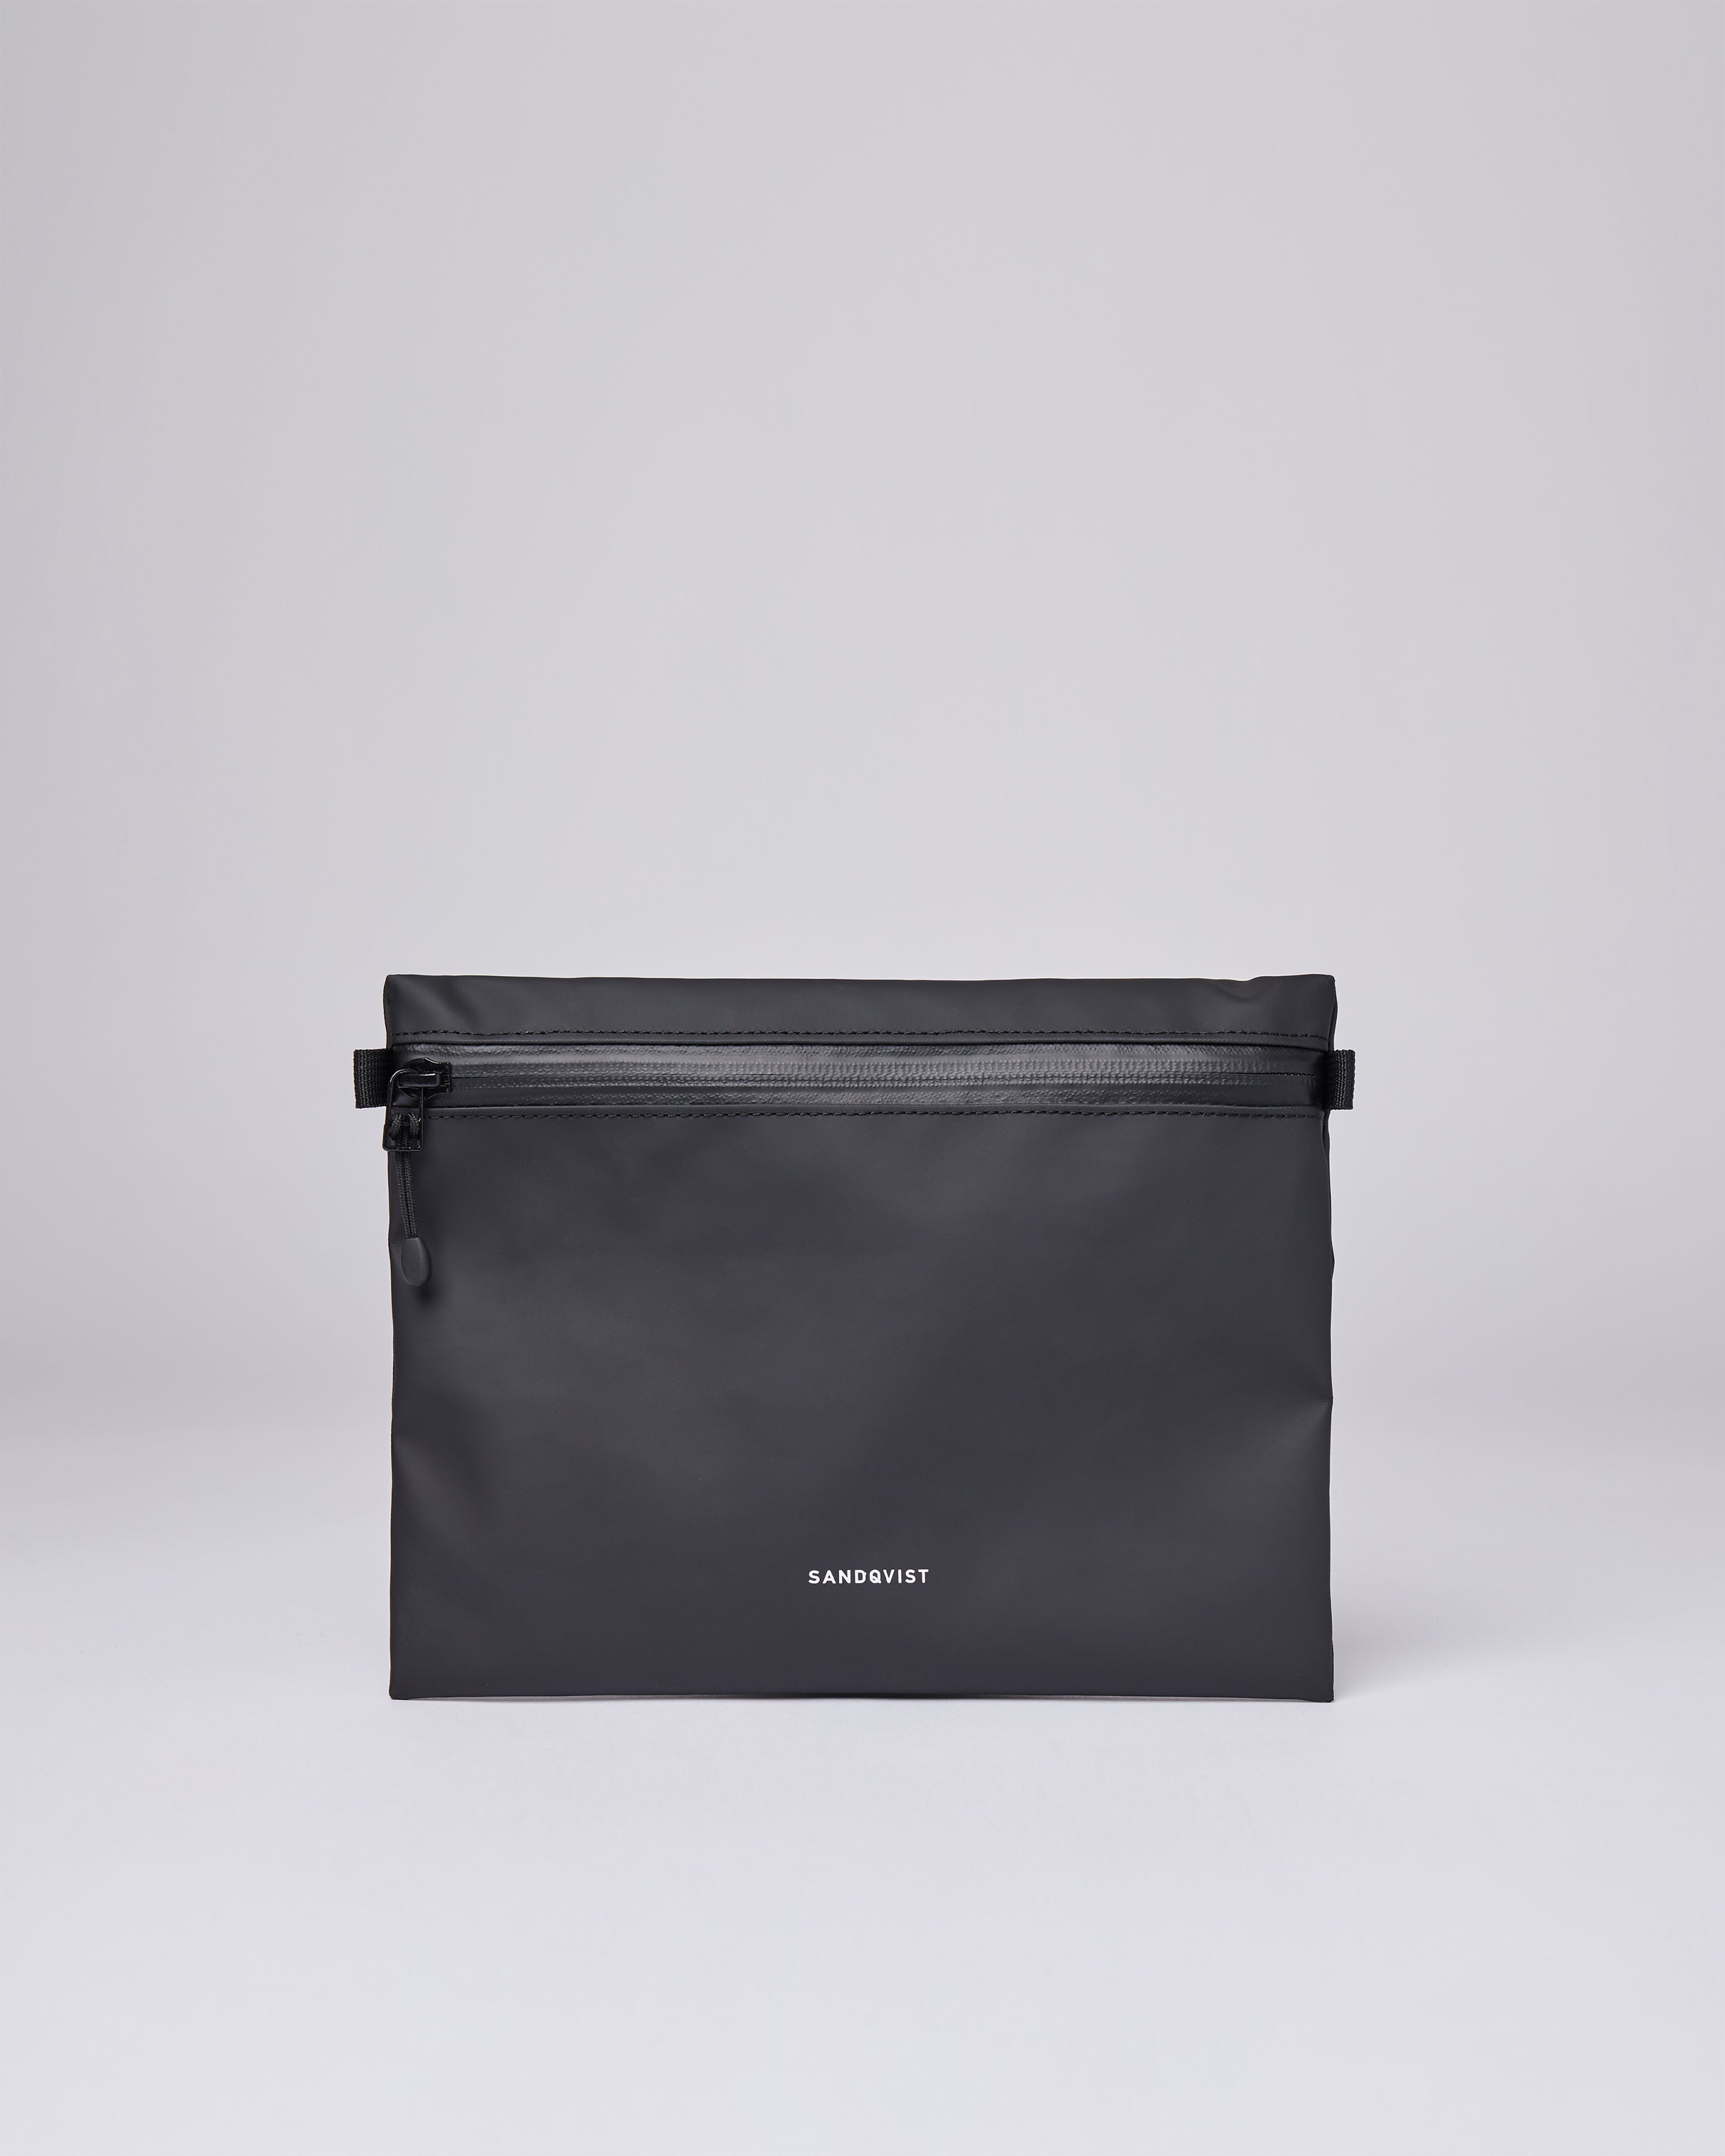 Sandqvist Sam Accessory Bag in Black SQA1857 | Shop from eightywingold an official brand partner for Sandqvist Canada and US.